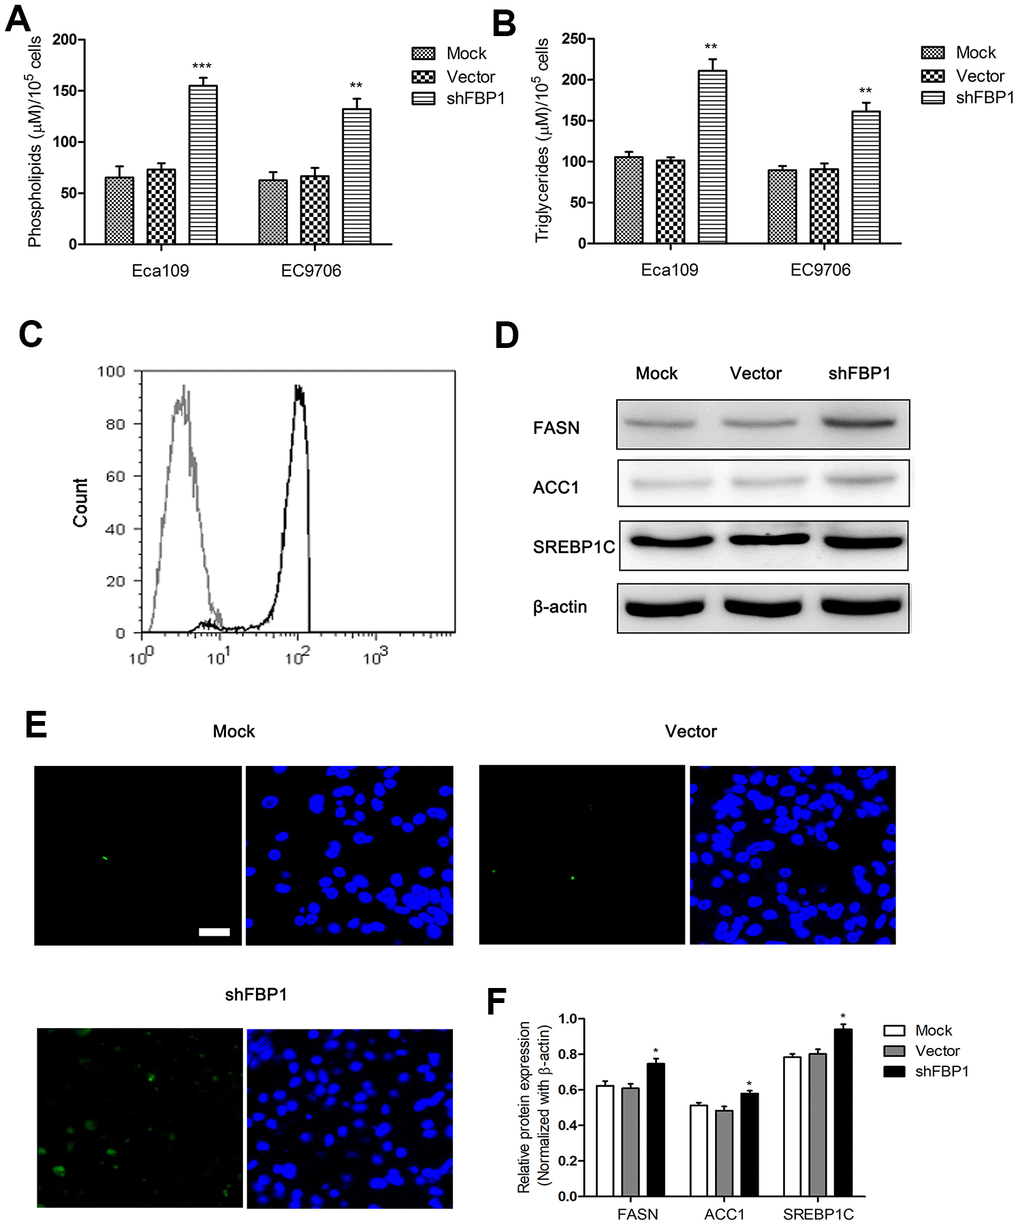 Loss of FBP1 regulated fatty acid metabolism in ESCC cells. (A) The impact of FBP1 expression on the content of phospholipids in ESCC cells. (B) The impact of FBP1 expression on the content of triglycerides in ESCC cells. (C) The neutral lipids content was detected by flow cytometry in Eca109 cells, gray, control; black, shFBP1. (D, F) The impact of FBP1 expression on the expression of FASN, ACC1 and SREBP1C was determined in ESCC cells. (E) The neutral lipids content was detected by staining with BODIPY 493/503 dye (green) and DAPI (blue) in Eca109 cells, scale bar= 20μm. Mock, the blank control group. Vector, the blank vector group. shFBP1, FBP1 shRNA vector group. **p